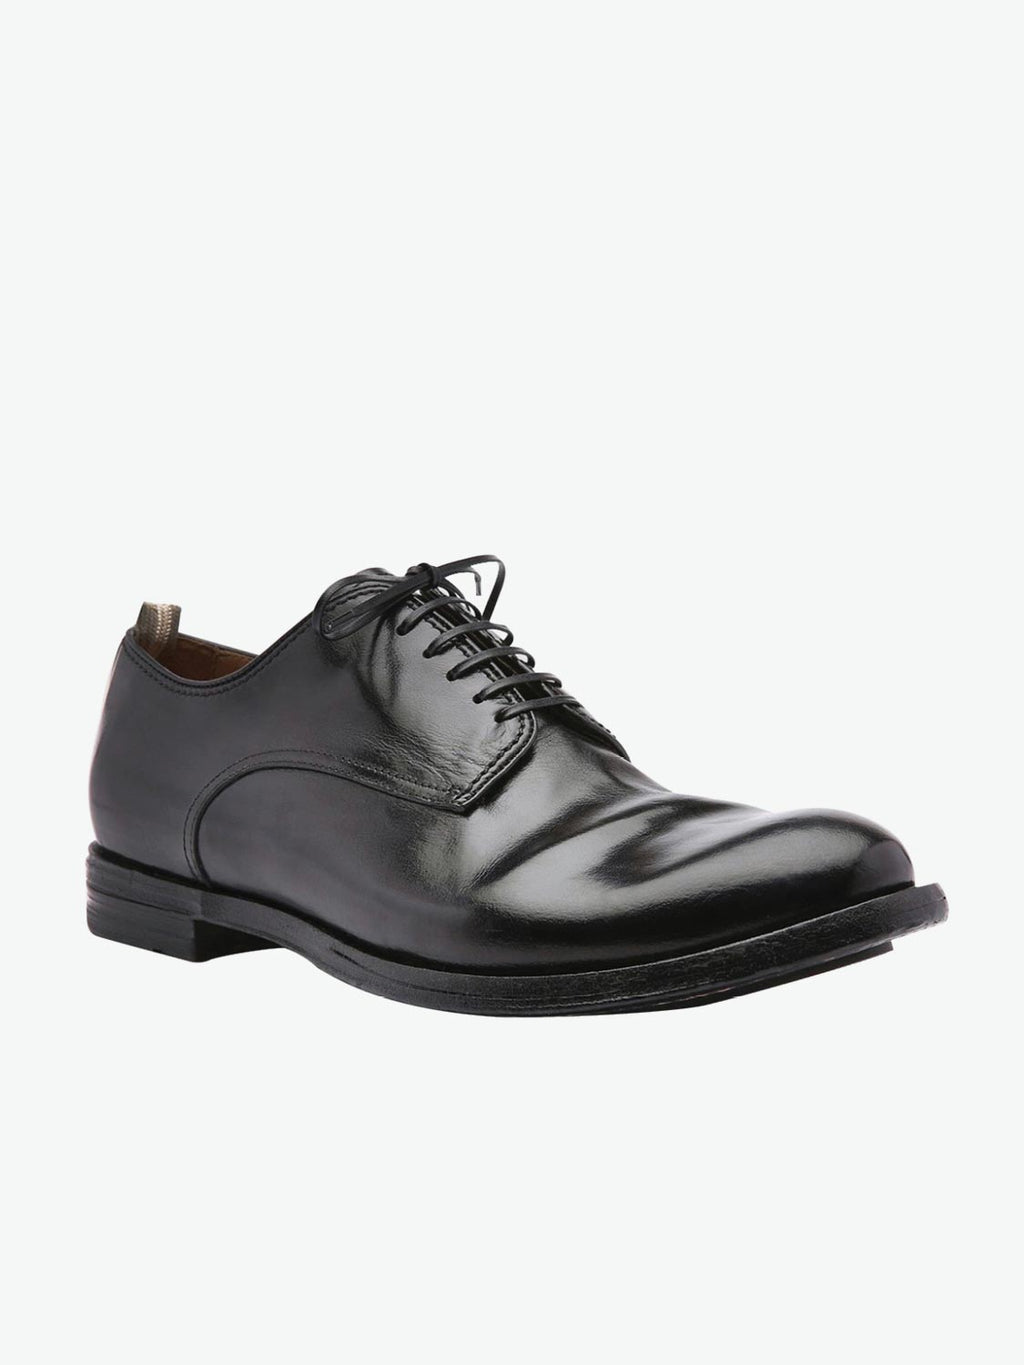 Officine Creative Anatomia Derby Leather Shoes Black | The Project Garments - B